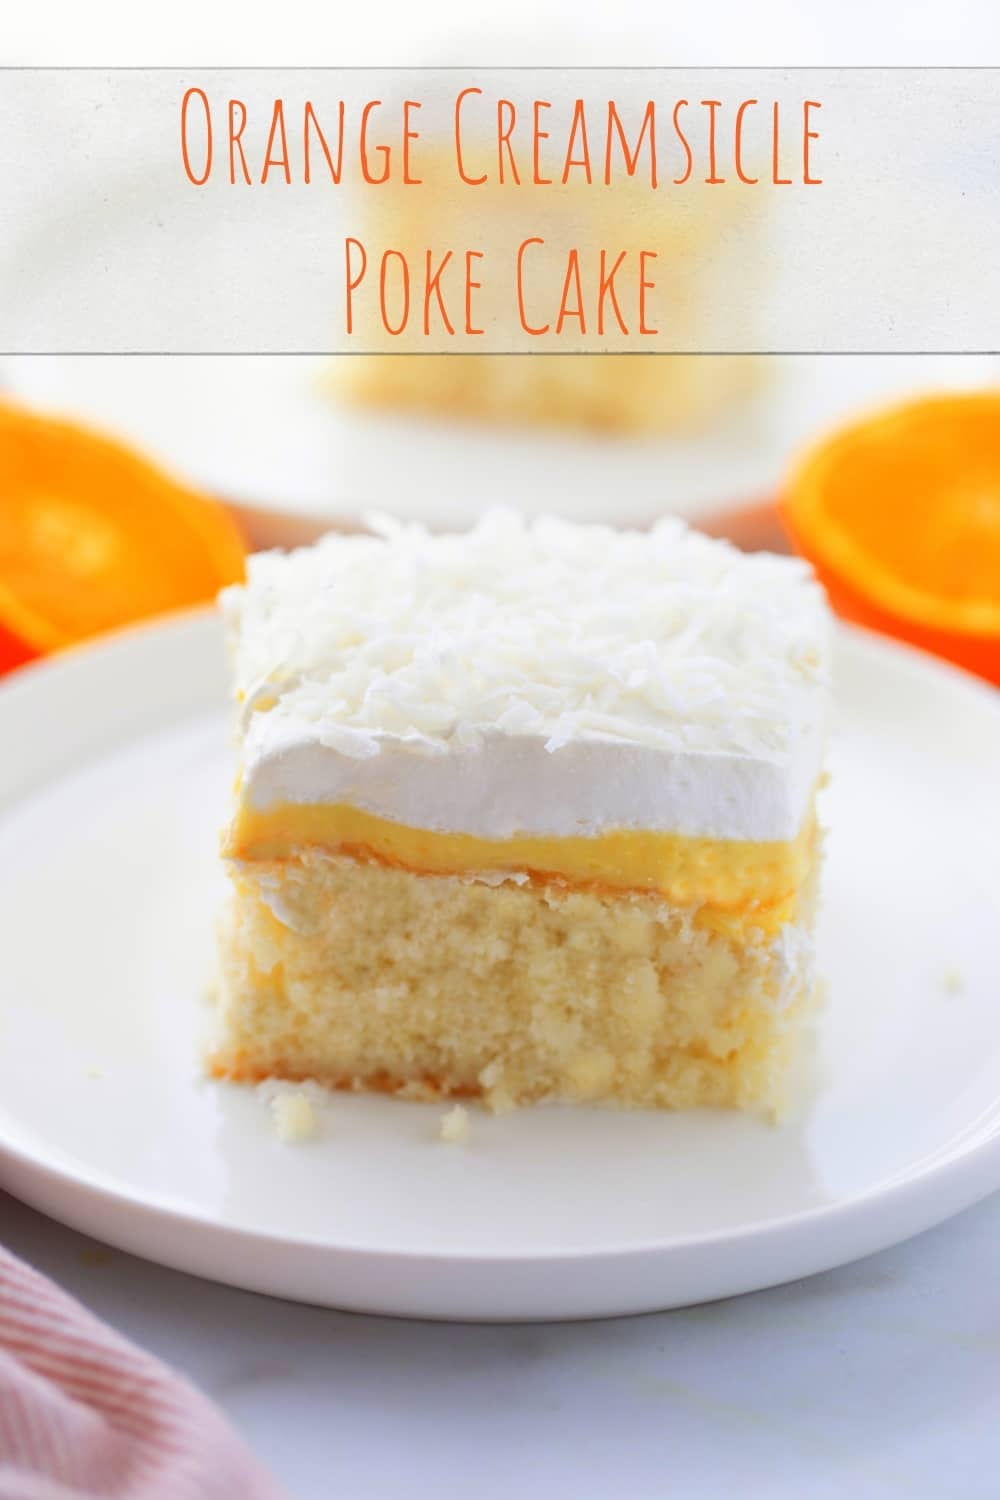 This just might be the dreamiest version of Orange Creamsicle Poke Cake thanks to the addition of cream of coconut incorporated into the cake batter. The layer of intense orange curd adds brightness, while injecting a zesty taste in every bite. via @cmpollak1